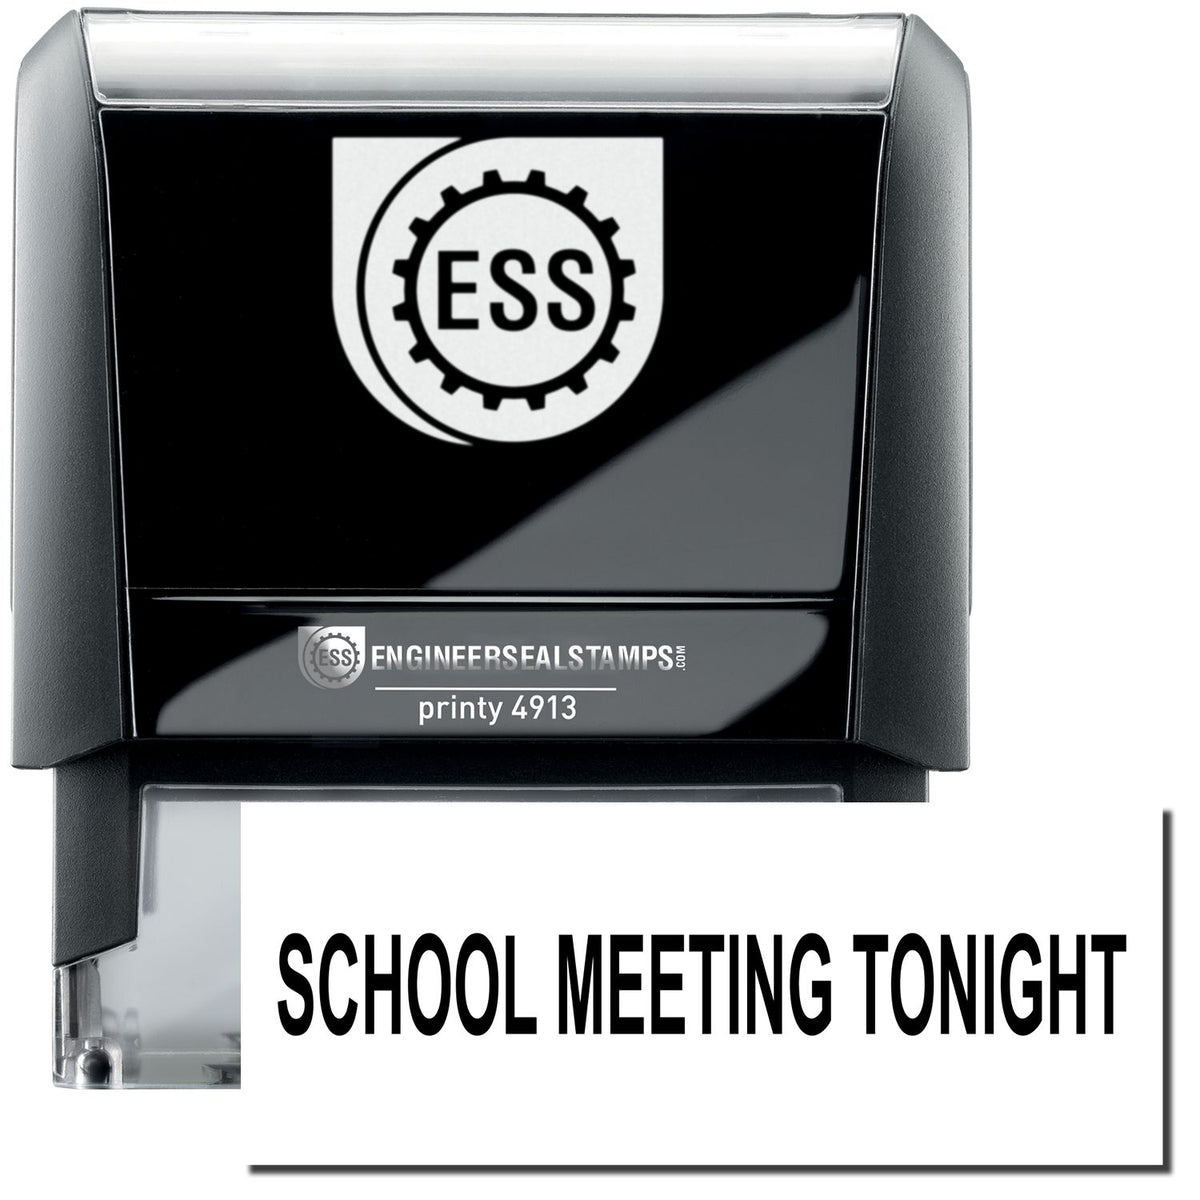 A self-inking stamp with a stamped image showing how the text &quot;SCHOOL MEETING TONIGHT&quot; in a large bold font is displayed by it.